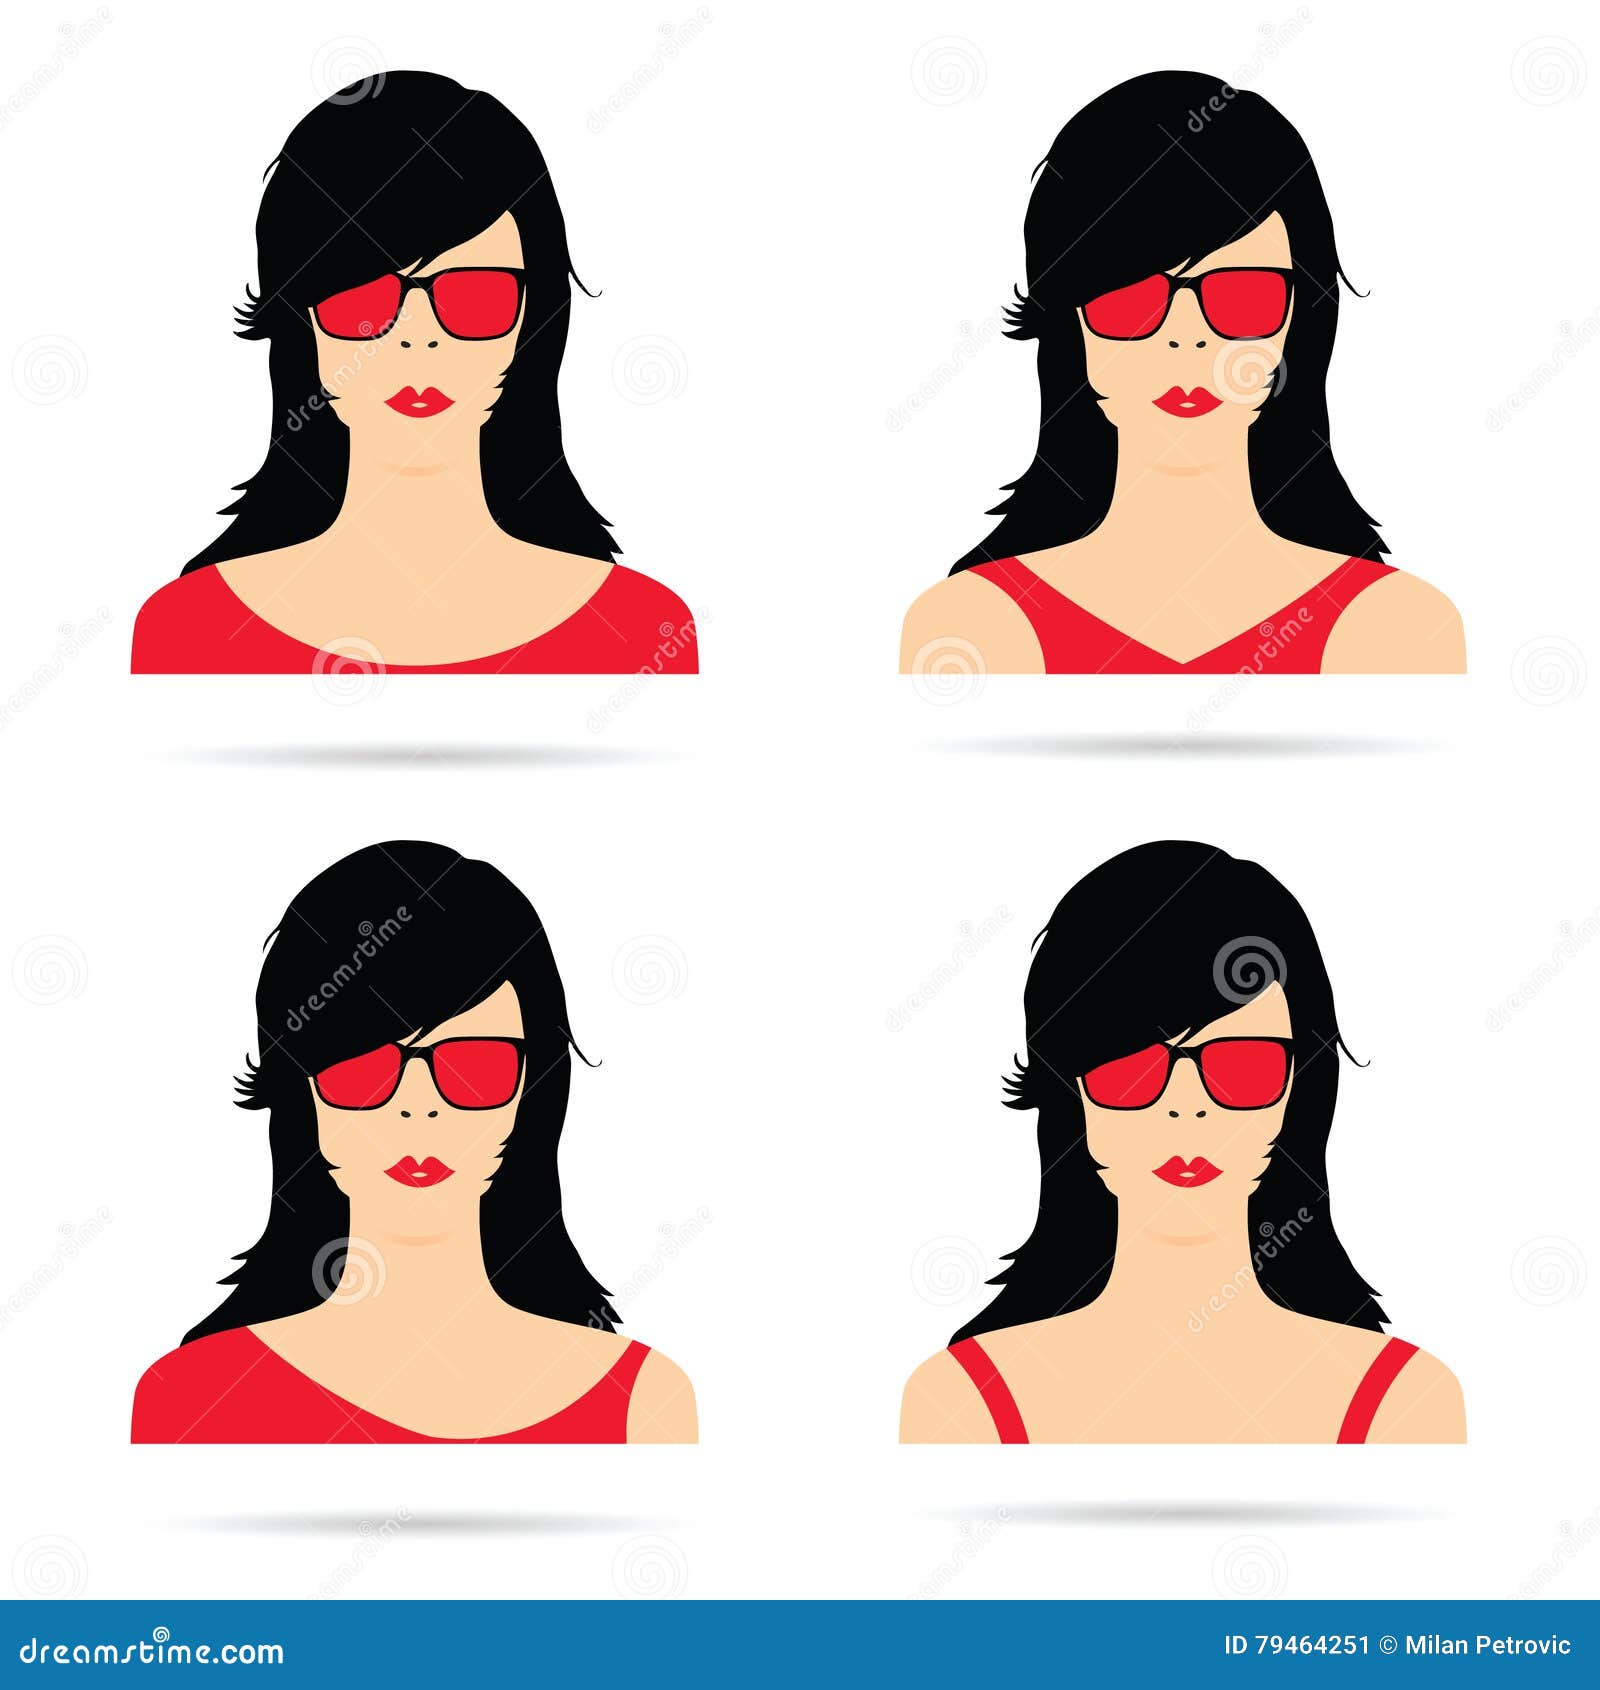 Woman Head with Red Sunglasses Set Illustration Stock Vector ...